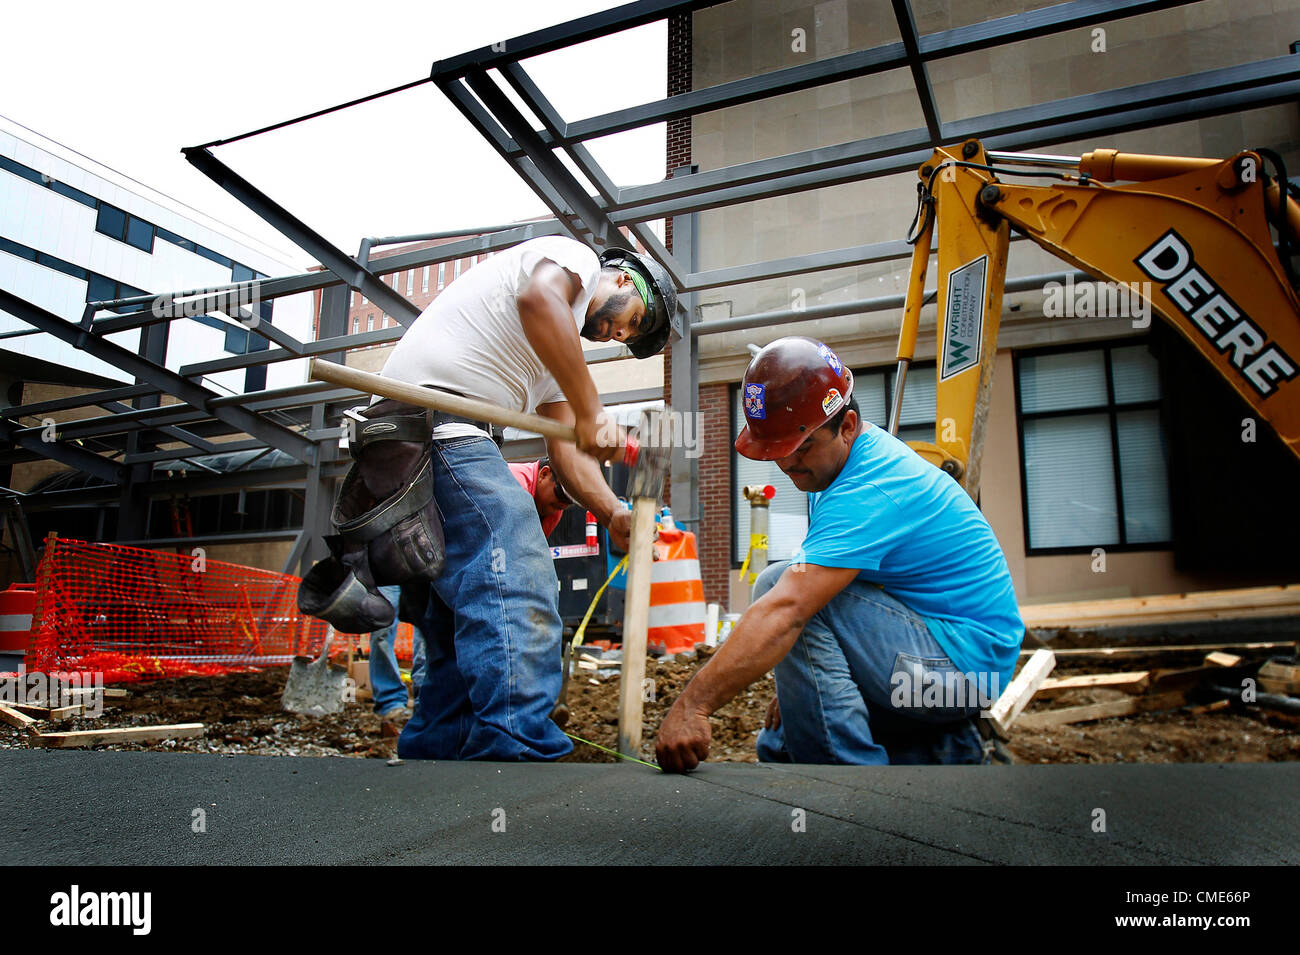 July 27, 2012 - Memphis, TN, U.S. - July 27, 2012 - Construction workers Cesar Arellano (left) and Juan Rodriquez (rigth) pound in a wooden maker as they prepare to lay concrete as part of a new driveway and awning at The Regional Medical Center of Memphis Friday morning. The Med board recently approved a $32.4 million plan to finish out floors in Turner Tower, which will allow the hospital to become more competitive in attracting paying patients. (Credit Image: © Mark Weber/The Commercial Appeal/ZUMAPRESS.com) Stock Photo